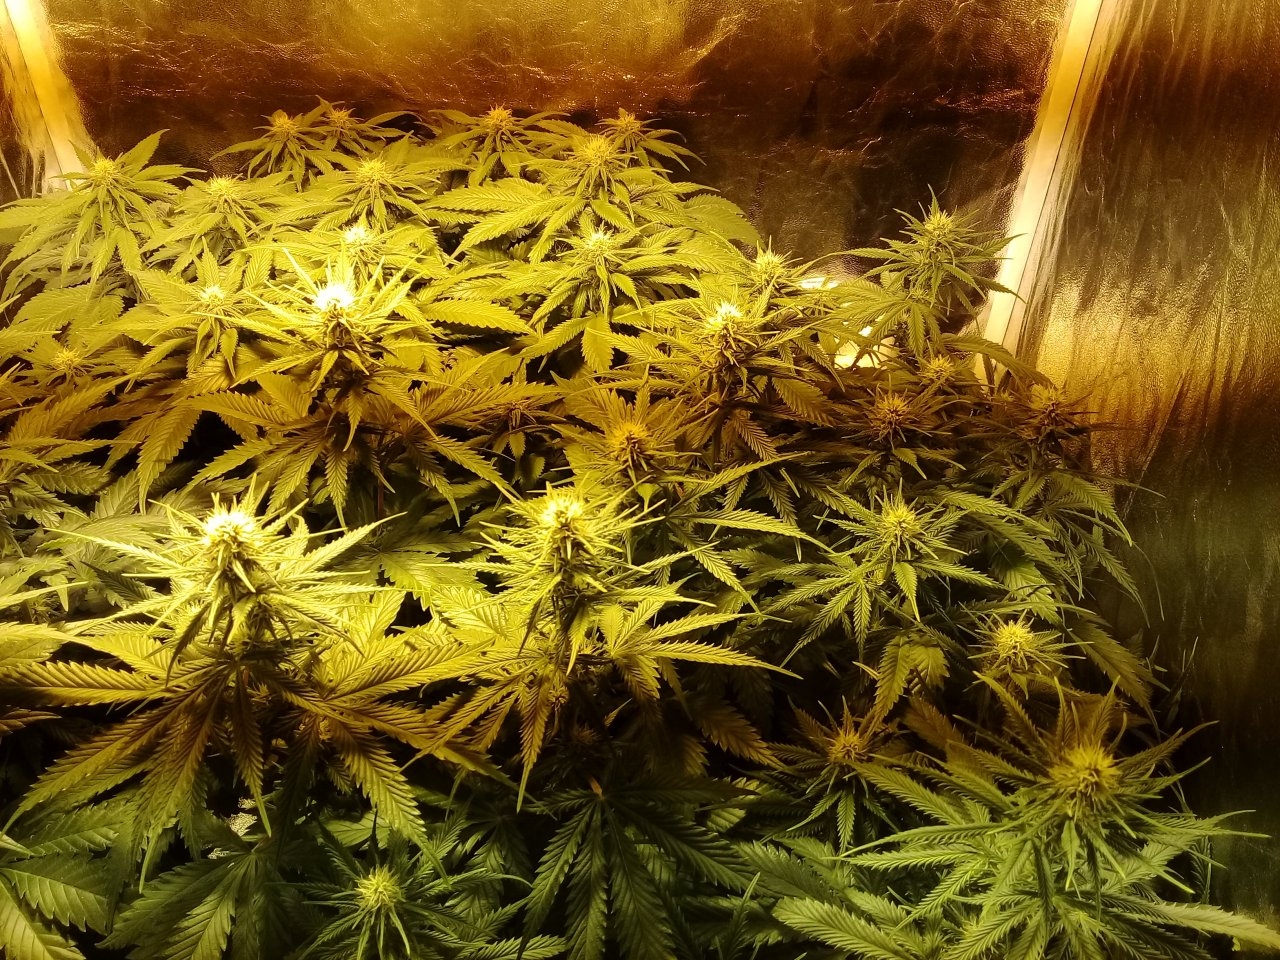 Flower tent day 27 of 12/12